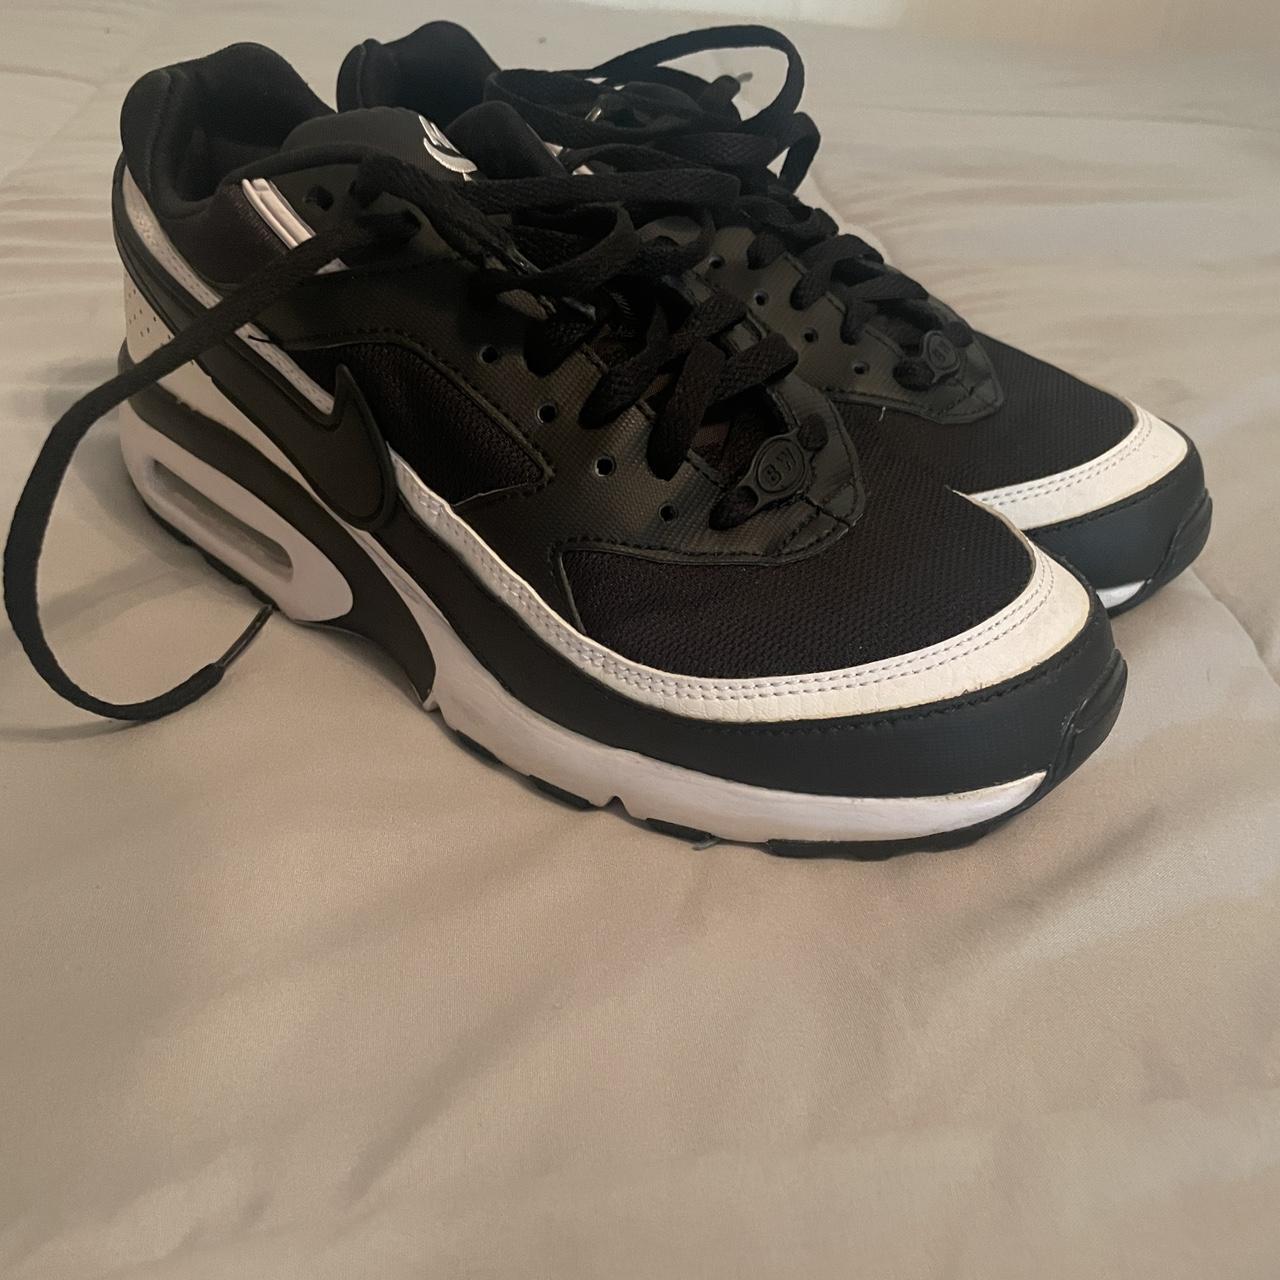 Nike black and white shoes! Barely ever... - Depop